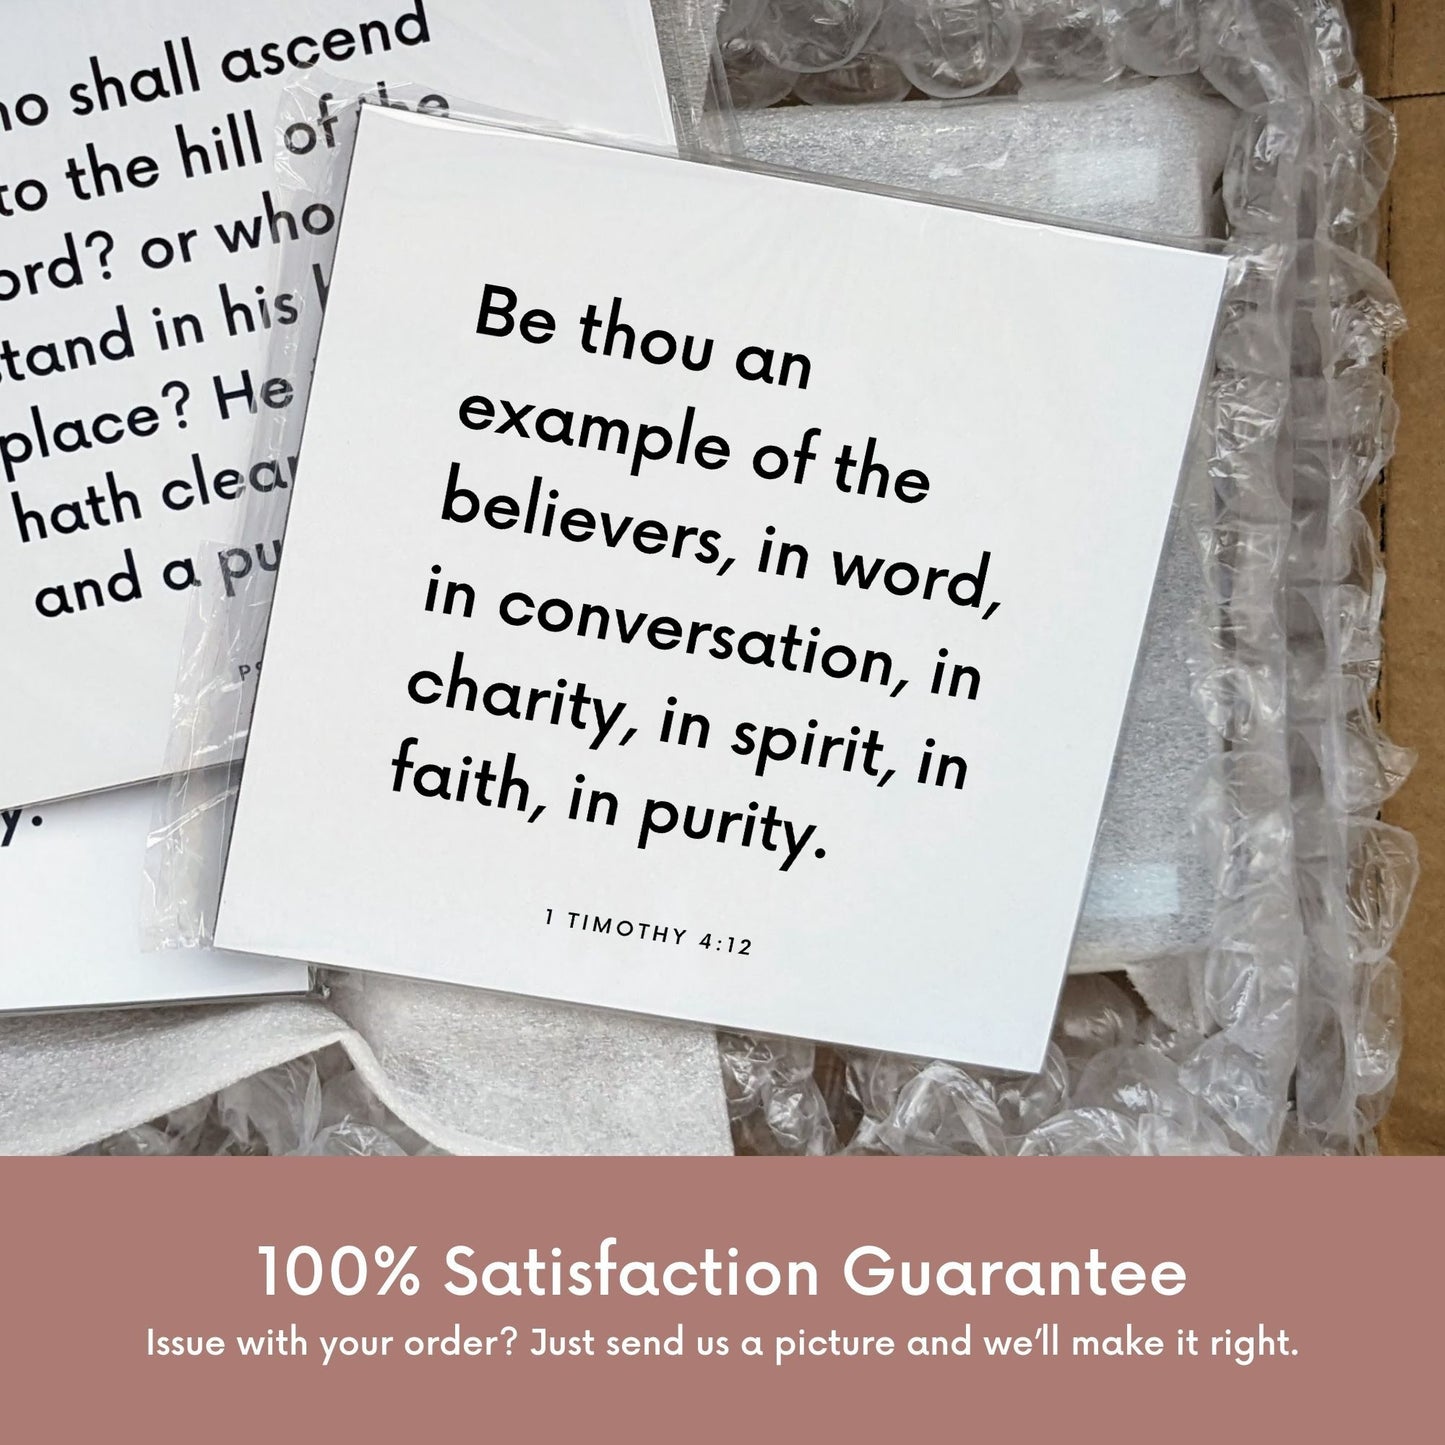 Shipping materials for scripture tile of 1 Timothy 4:12 - "Be thou an example of the believers"